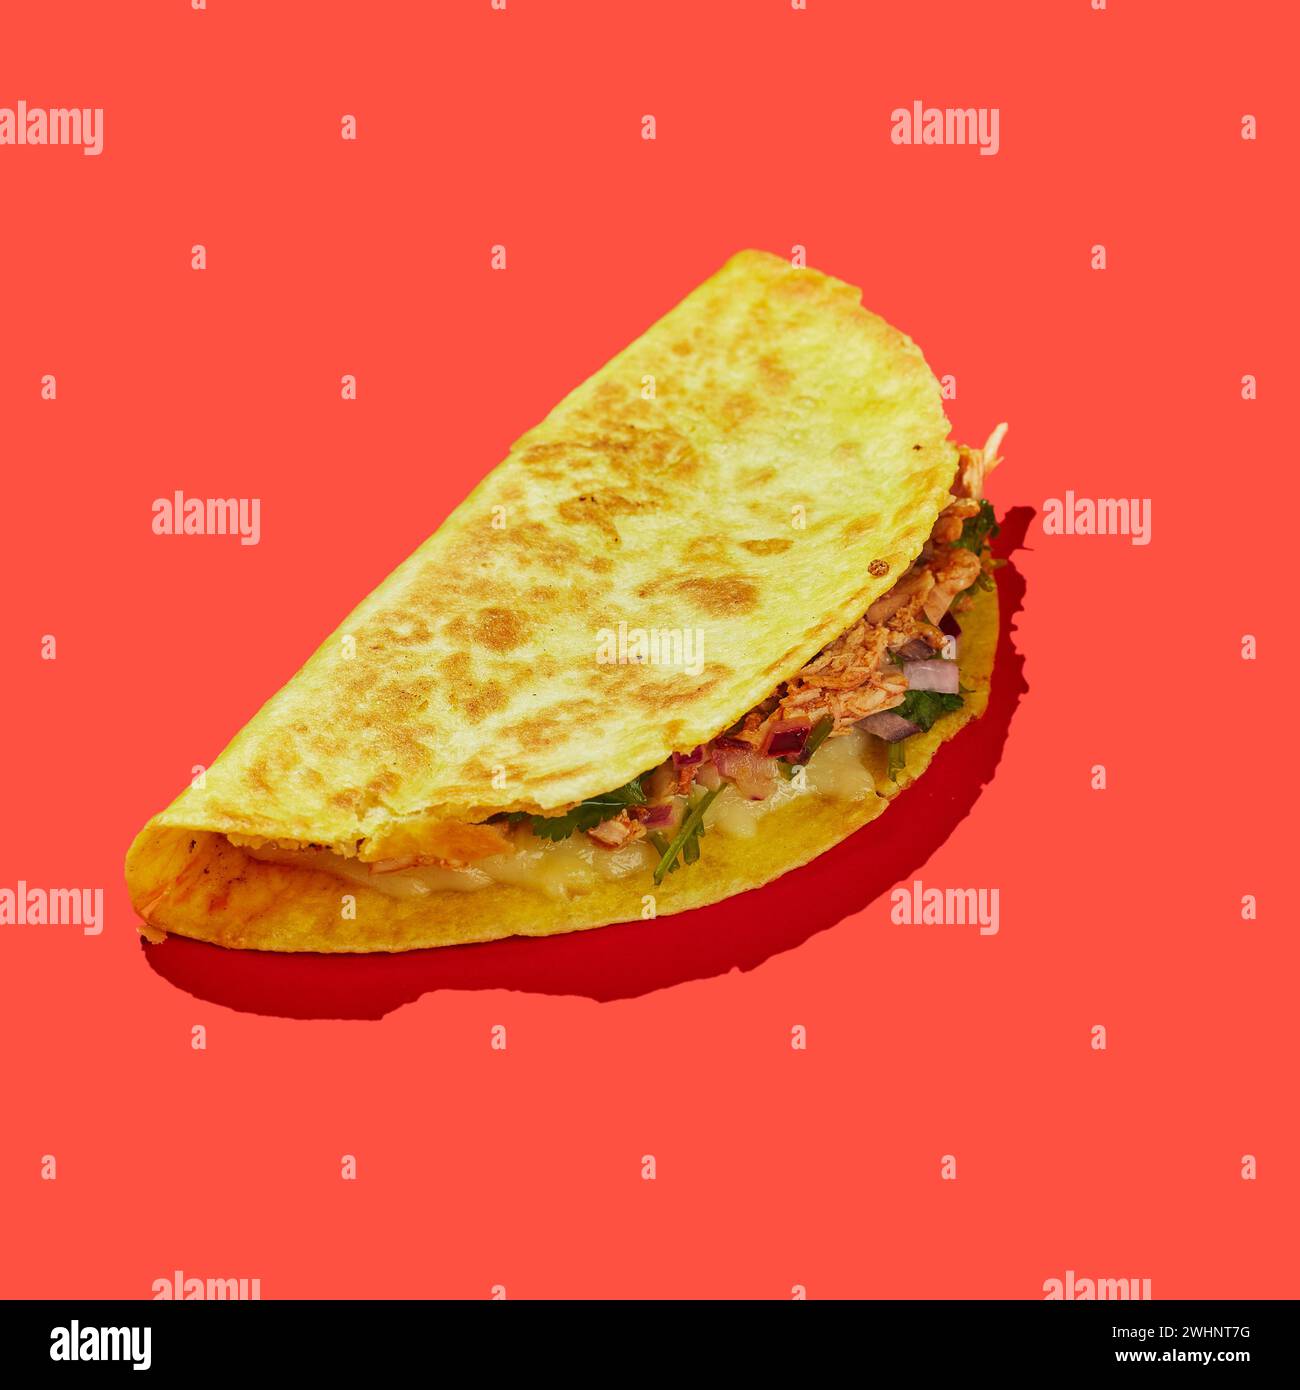 Tacos - traditional Tex-Mex dish on red background Stock Photo